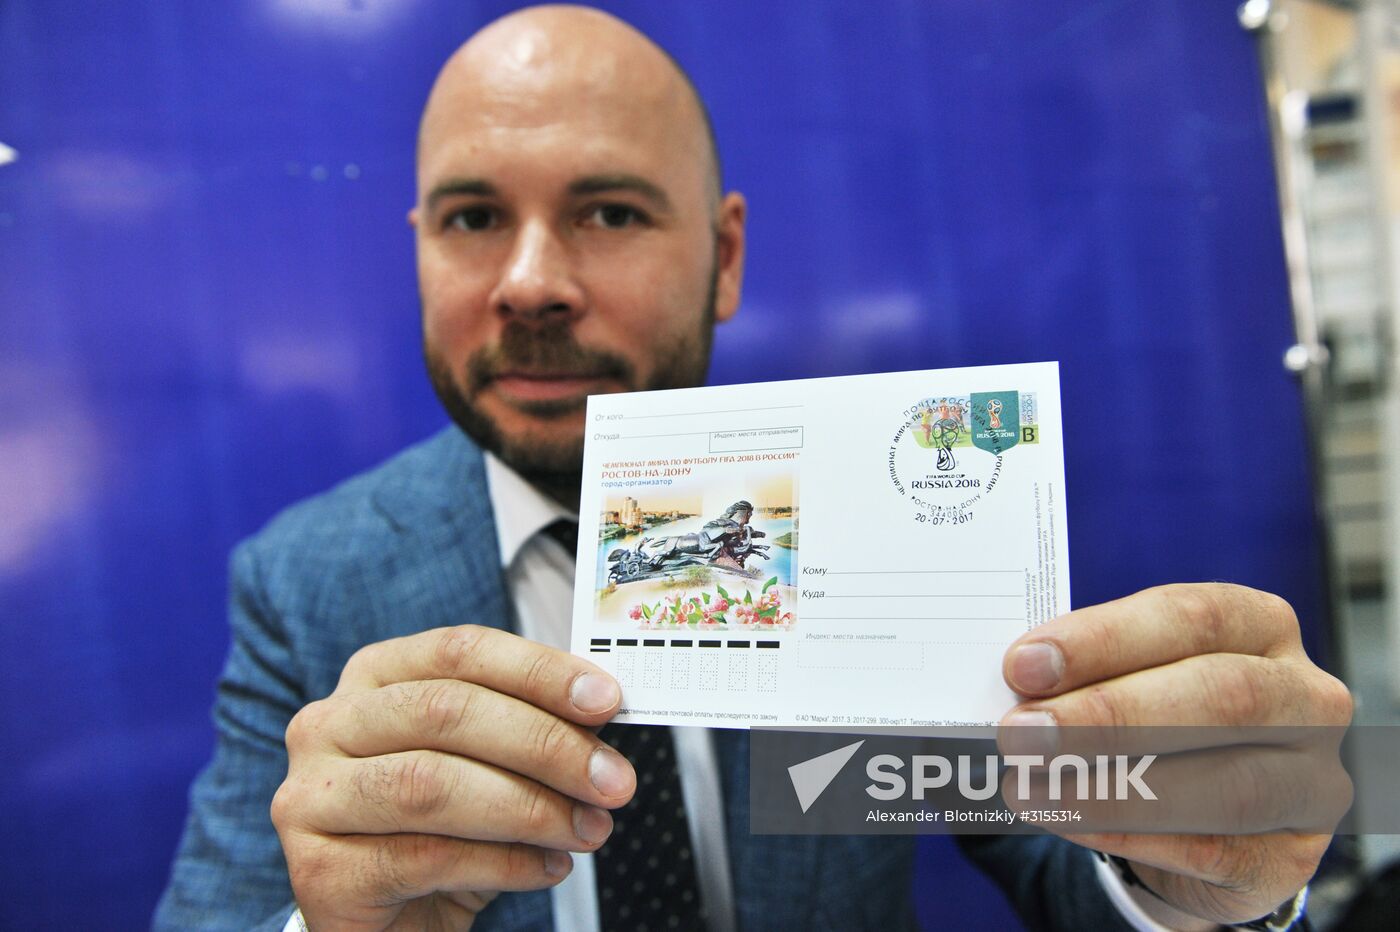 Russian Post issues postcard dedicated to Rostov-on-Don, 2018 FIFA World Cup host city